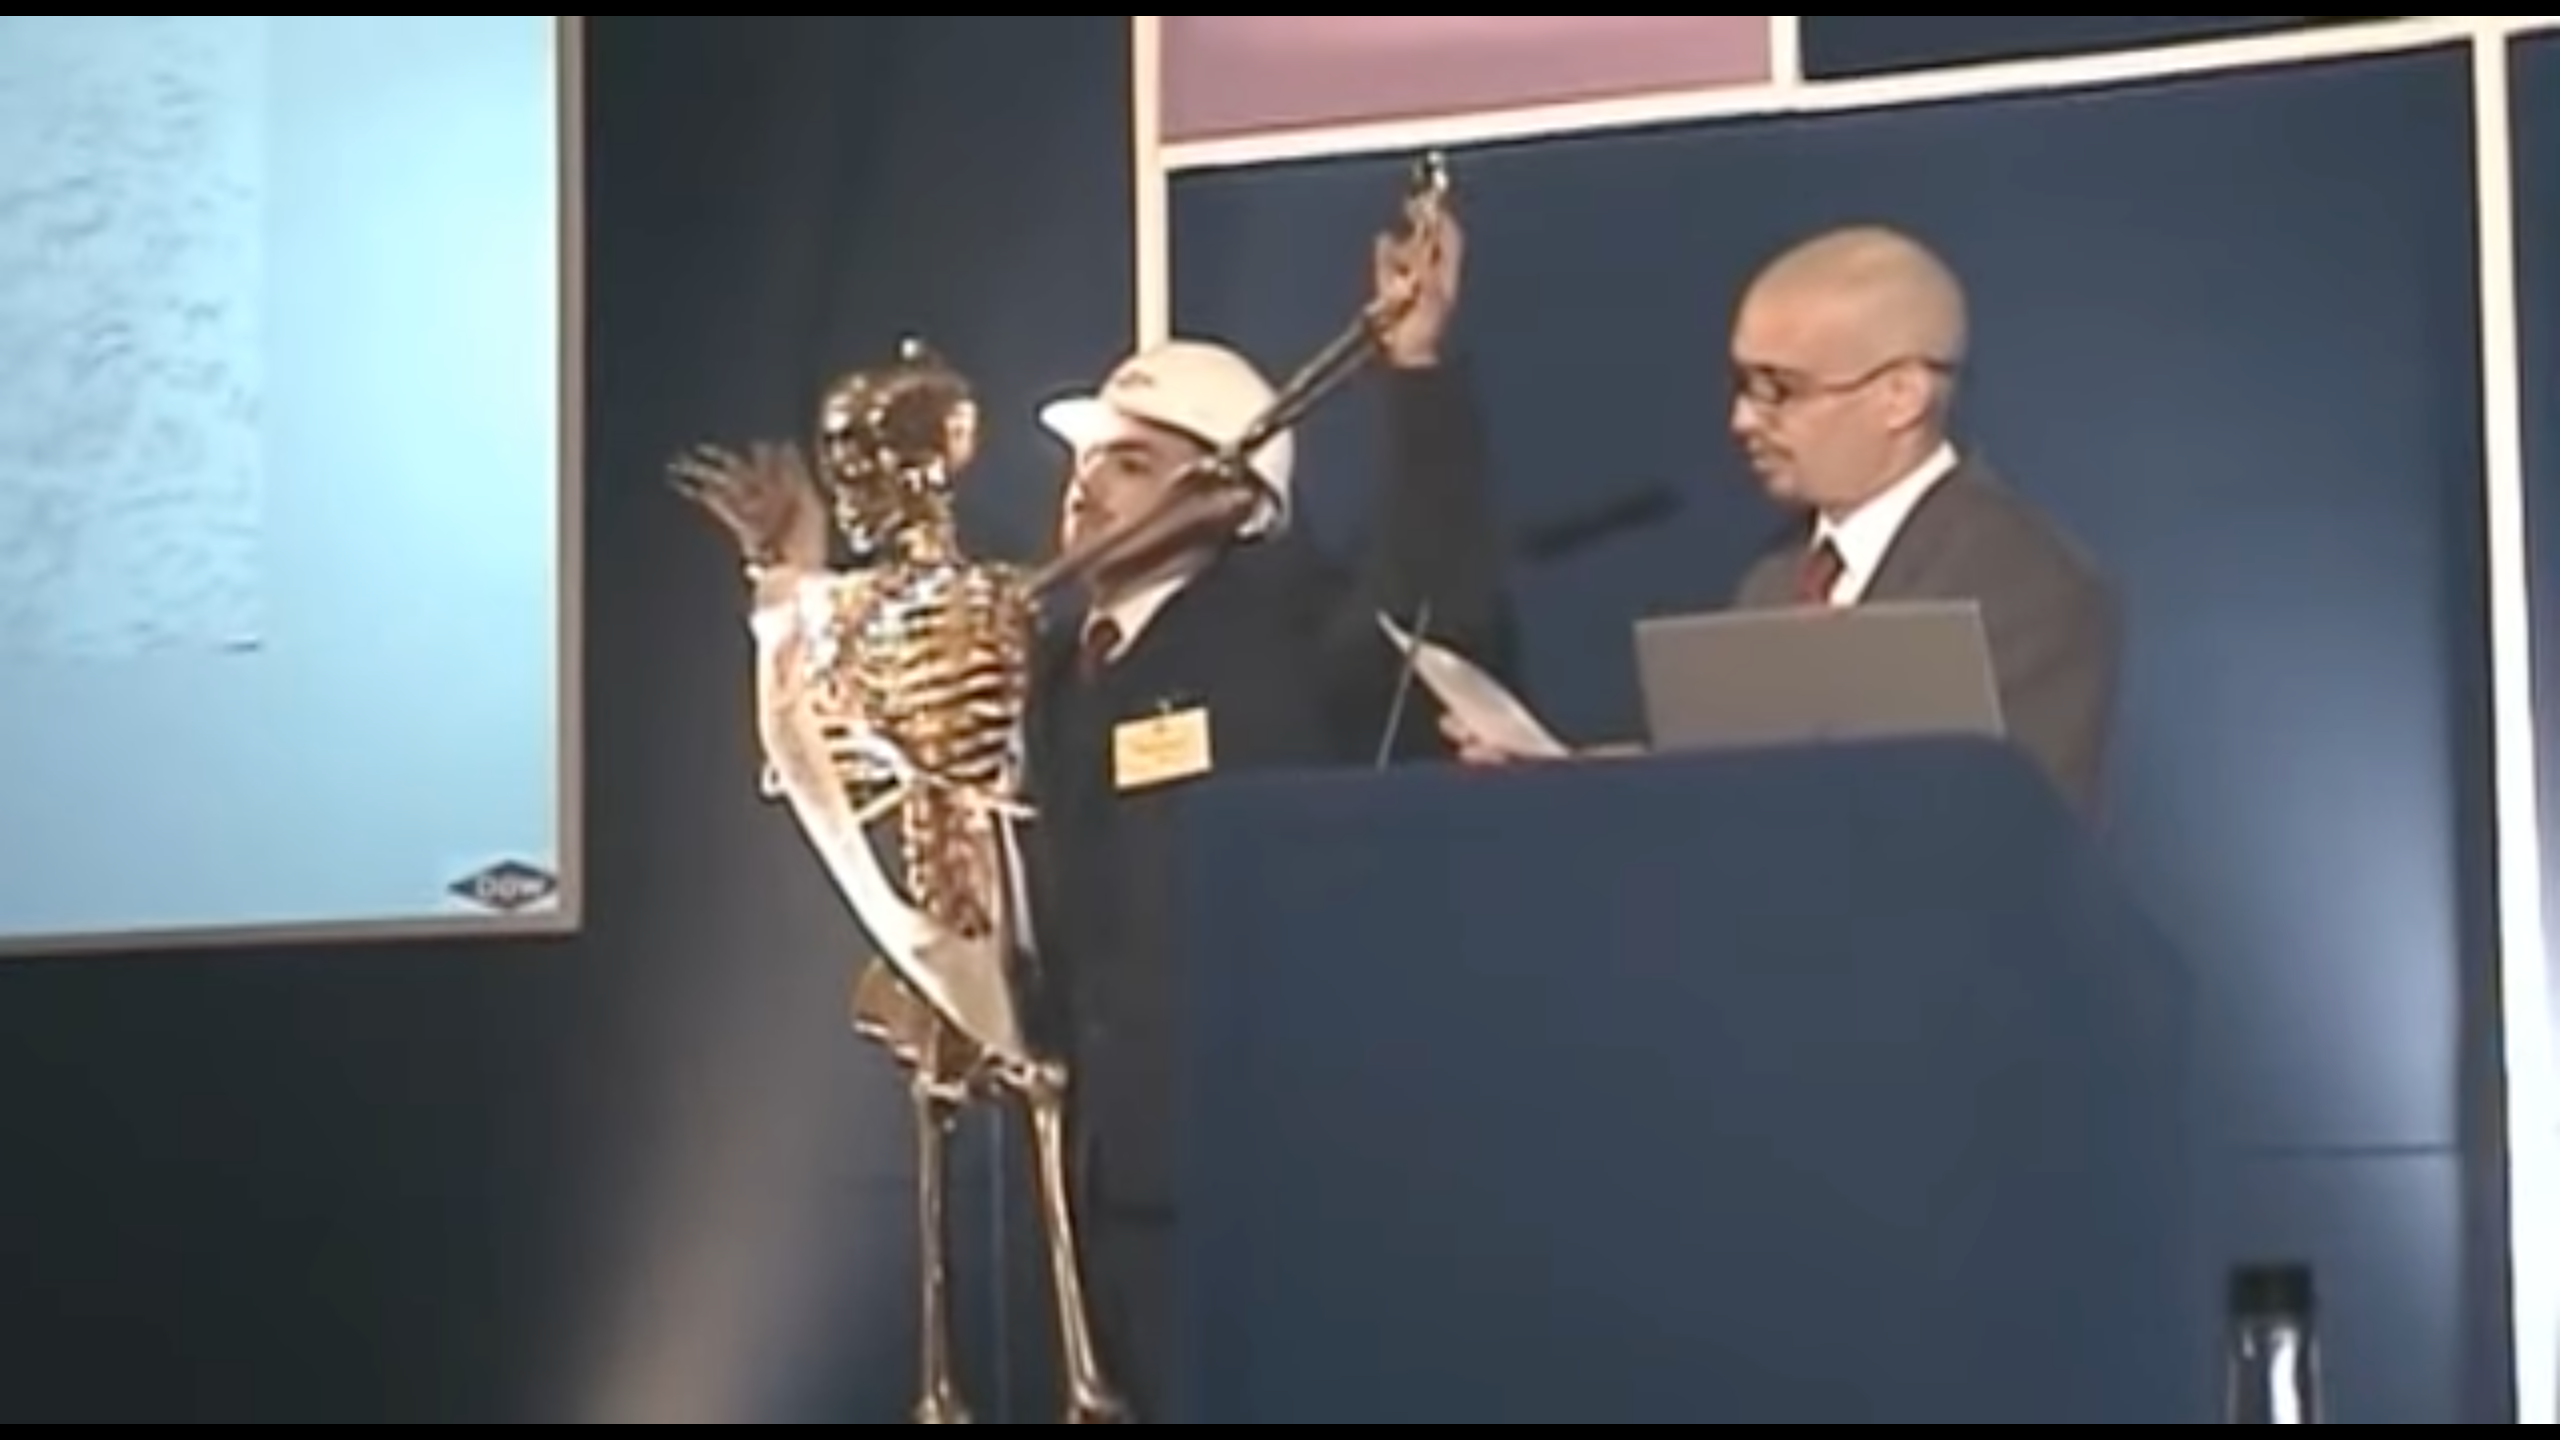 The Yes Men present at a London conference while holding up Gilda the golden skeleton.